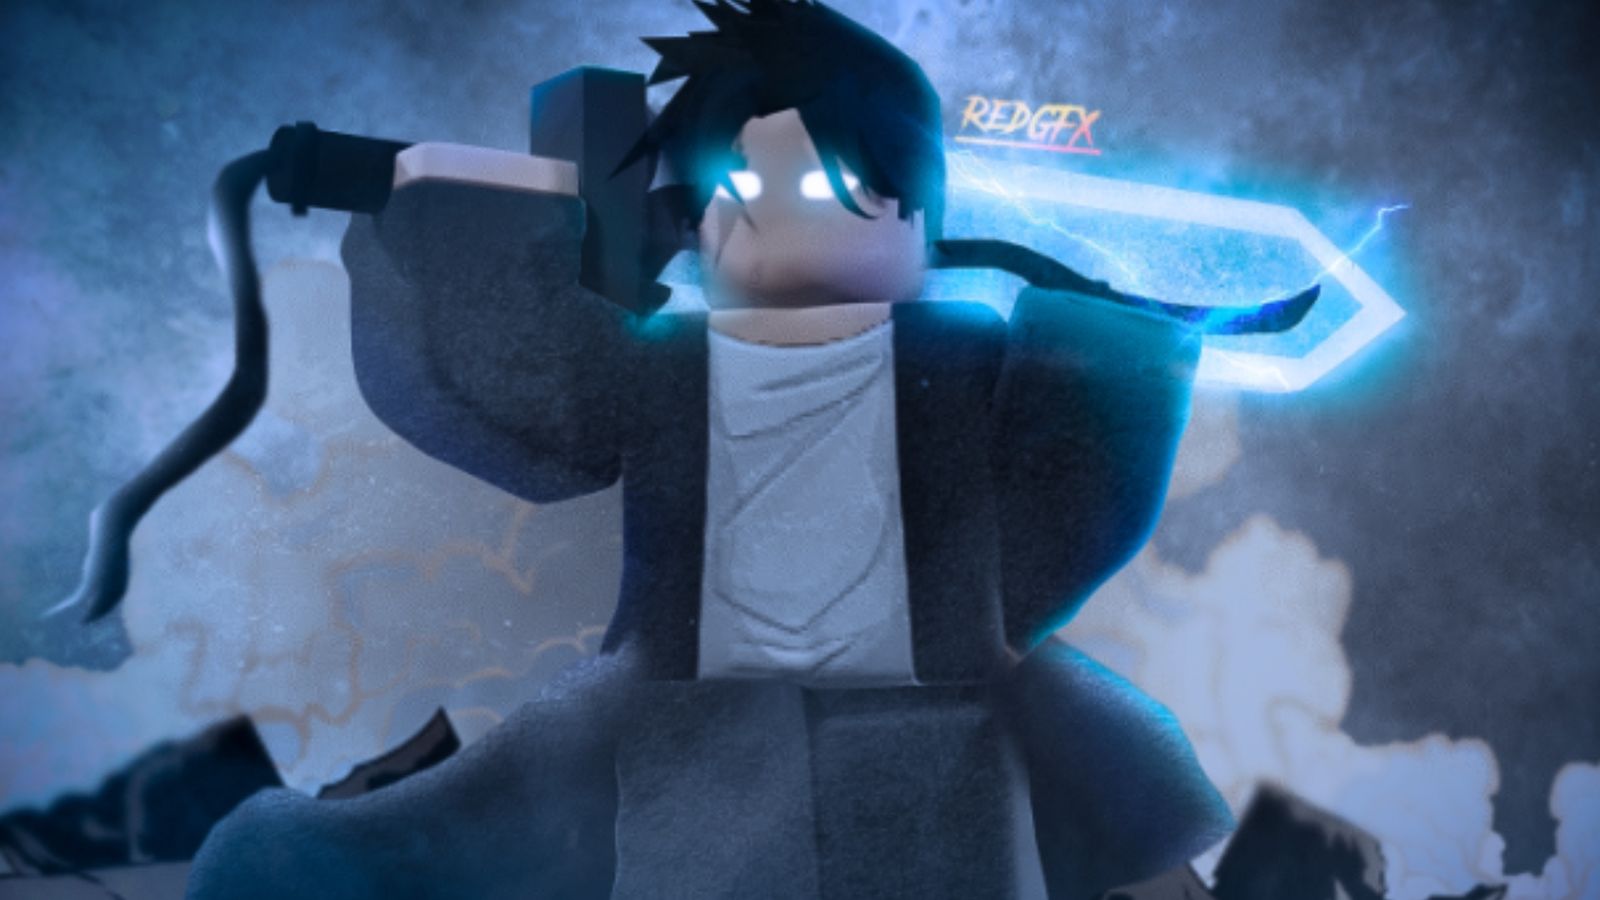 Screenshot from Solo Blox Levelling, showing a Roblox character wielding a sword